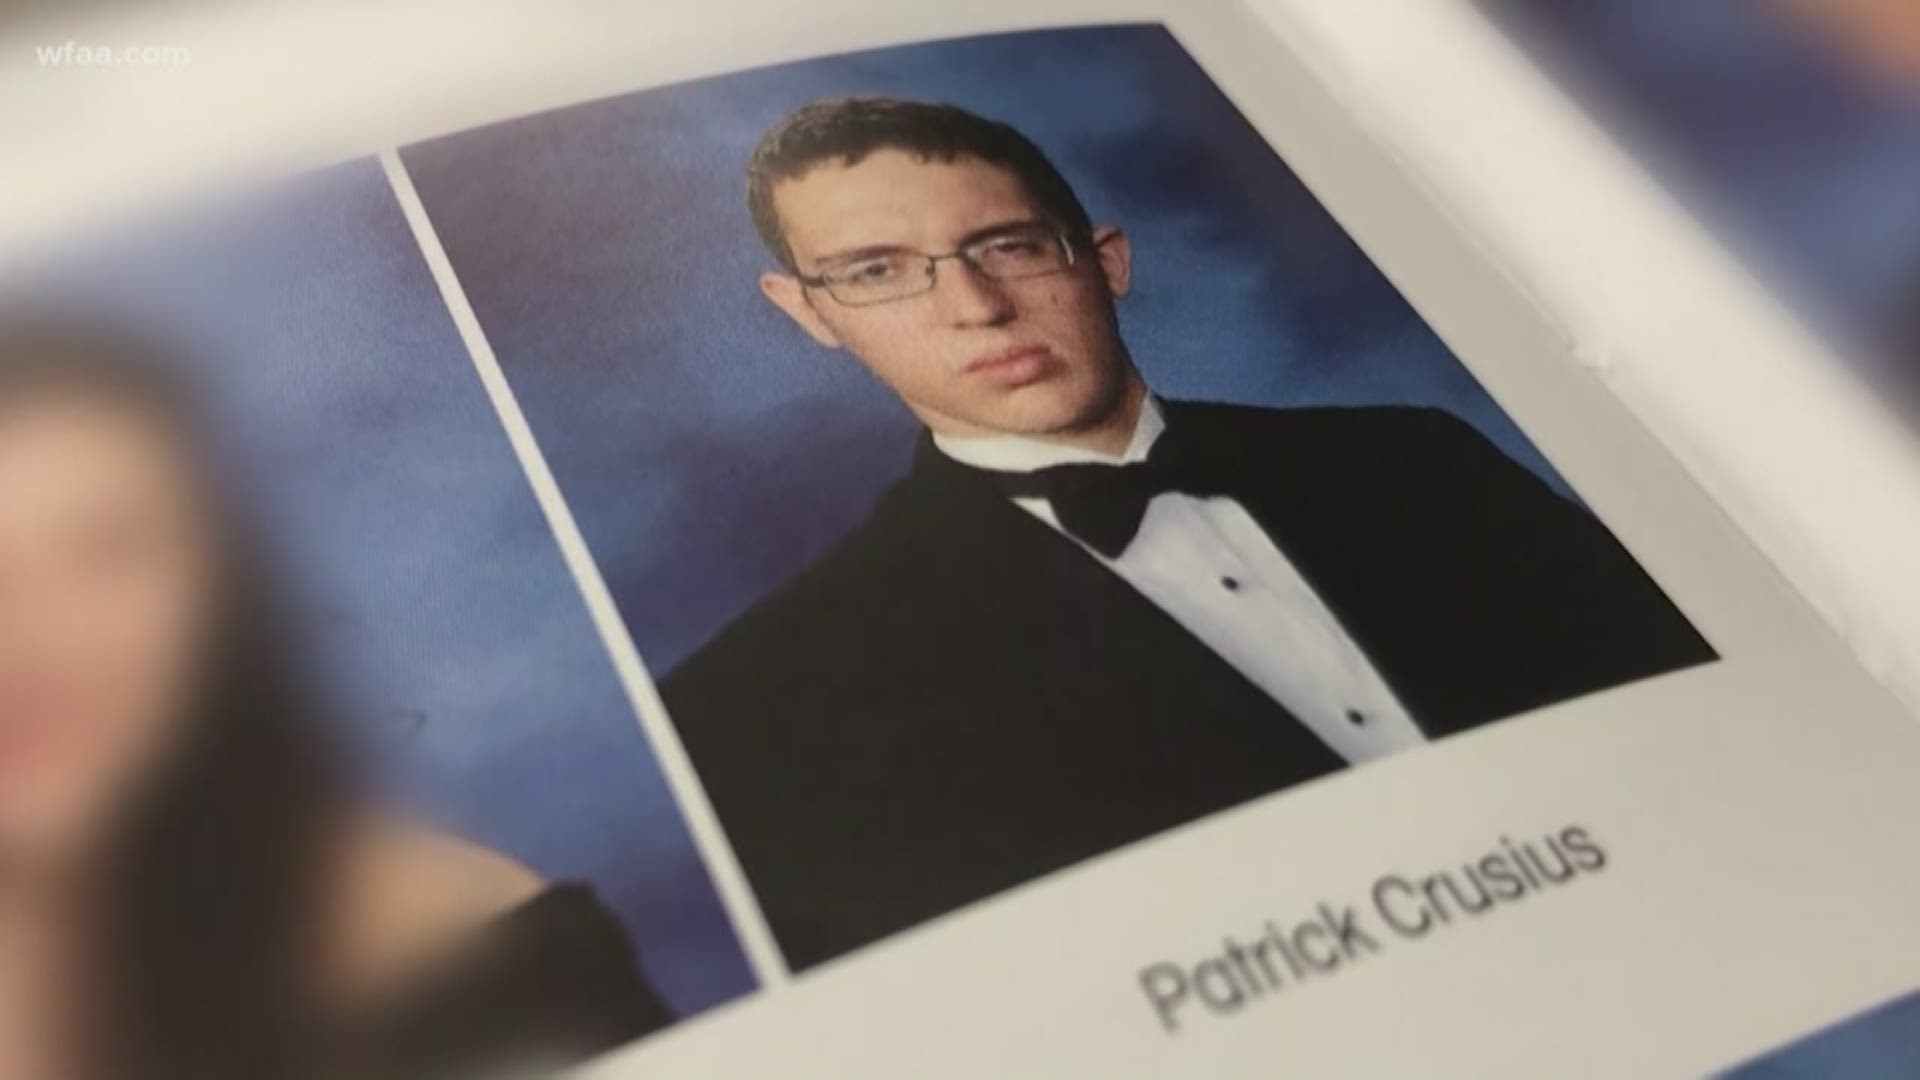 Allen police say it was a 10-minute phone call between Patrick Crusius' mother and a public safety officer.